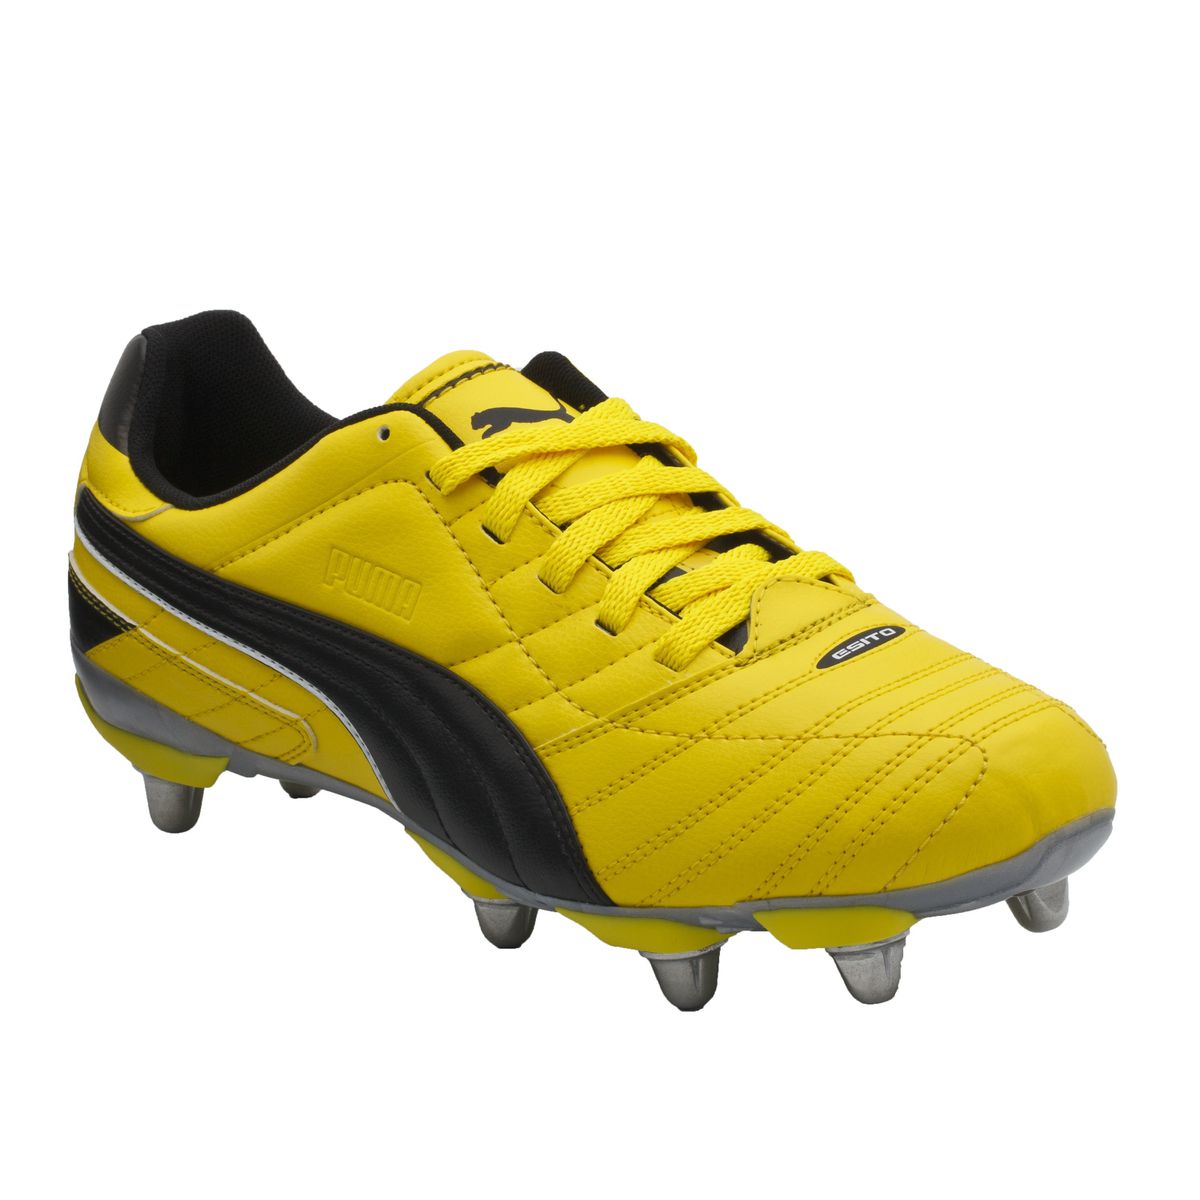 puma rugby boots for sale in south africa